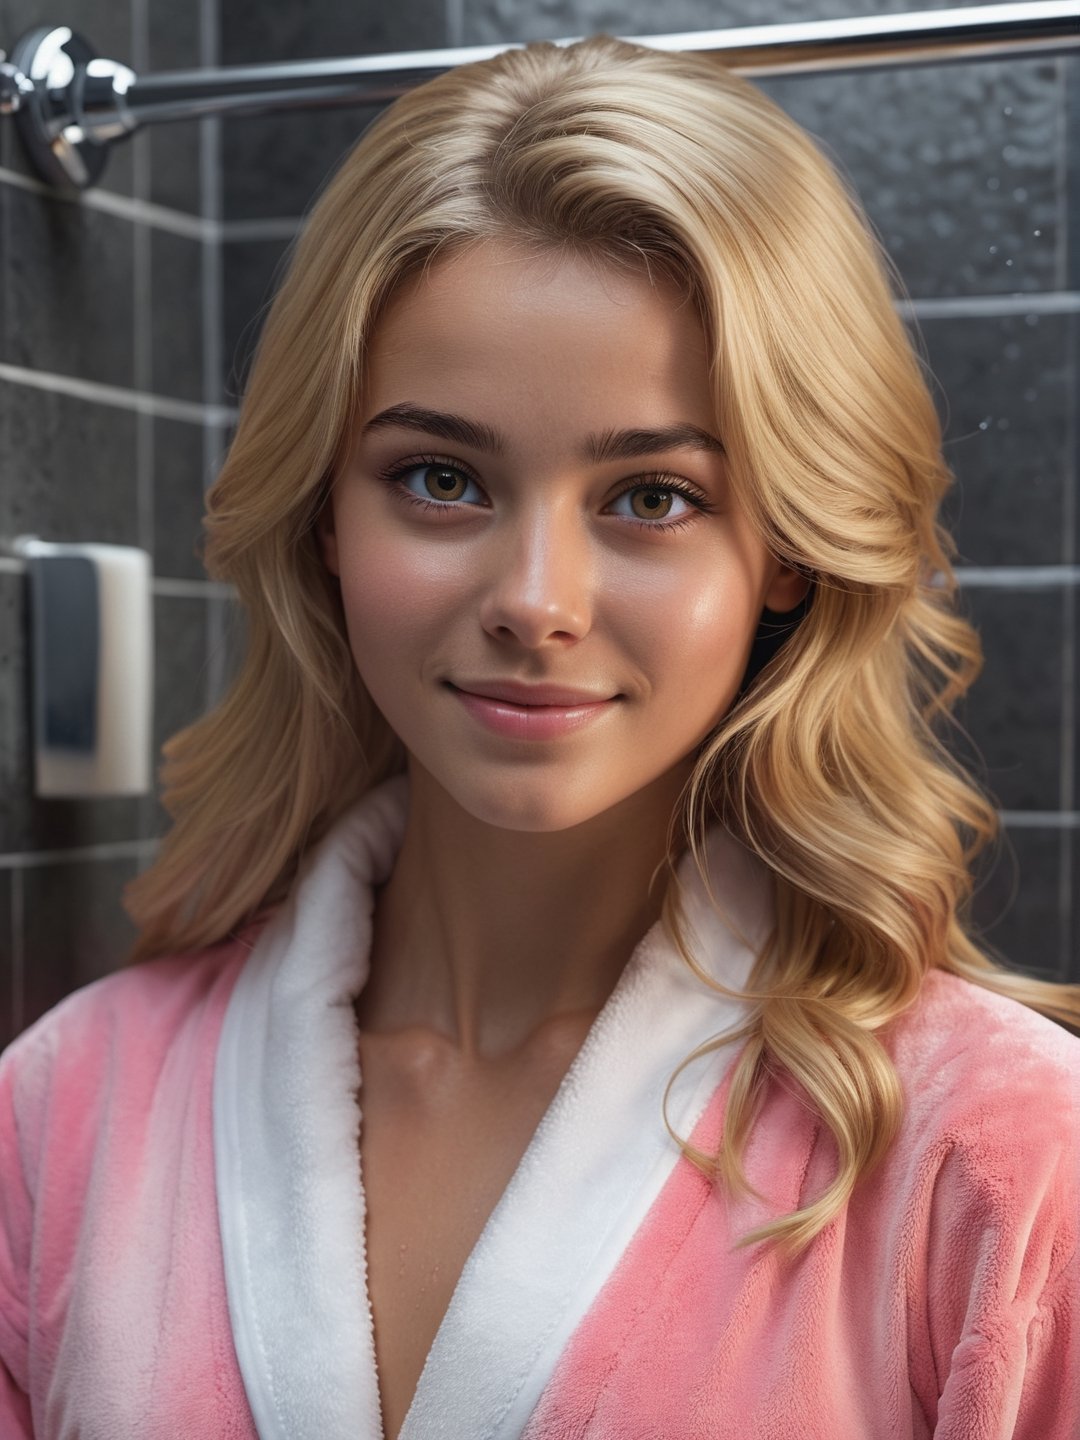 photo r3al, sfw, portrait, masterpiece, best quality, 8k, ultra realistic, ultra detailed, extra sharp, 18 years old, sexy blonde girl, hot, natural skin, bedroom, smirking, detailed face and eyes, natural lighting, in the shower, natural beauty, natural face, black hair, sfw, small breasts, sexy pink bathrobe, (((closeup, closed mouth))), tanned skin, juicy, detailed eyes, realistic eyes, smirking, long hair